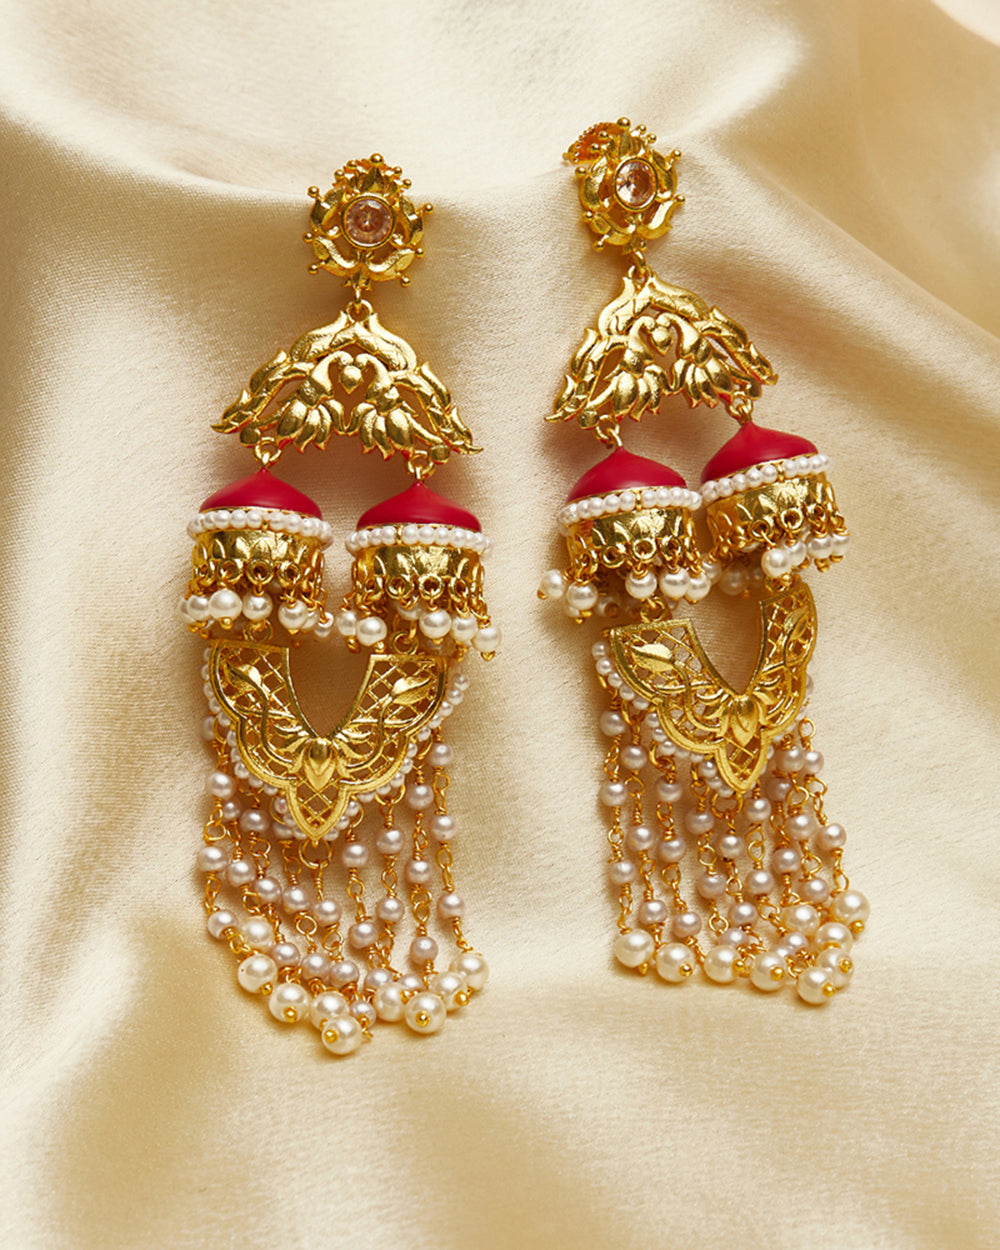 Women's Apsara Dye Gold Earrings With Red Jhumkis And Beaded Chains - Voylla